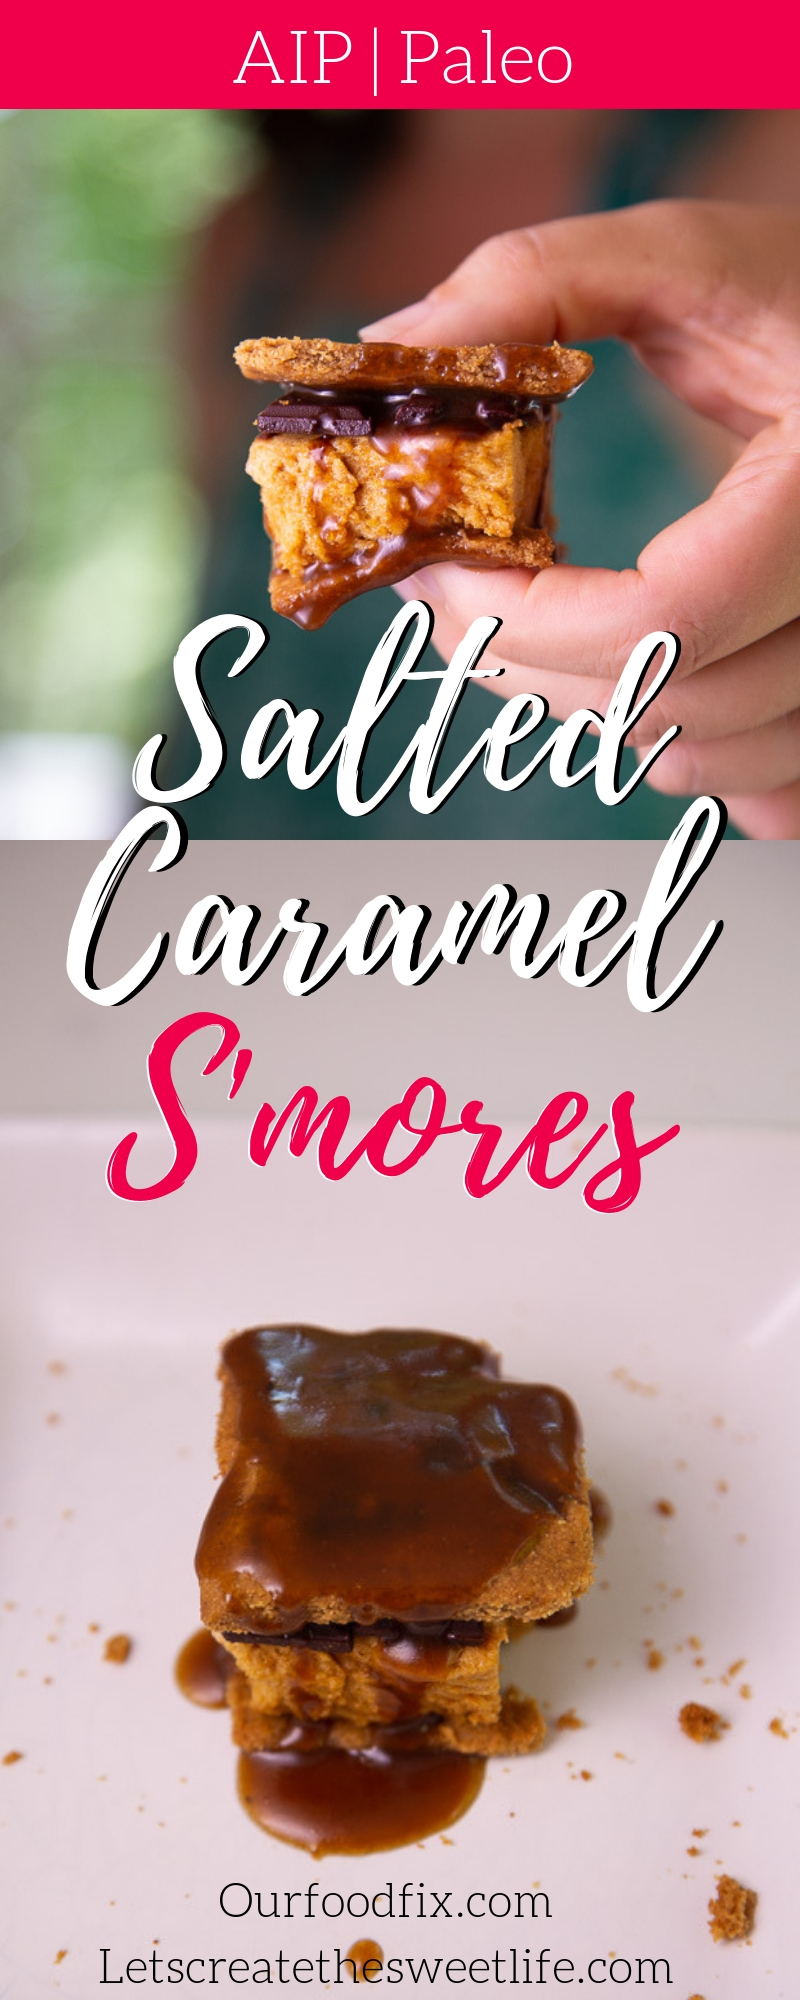 A healthier take on the classic campfire treat, these AIP and Paleo s'mores are sure to please! #smores #paleorecipes | AIP recipes | AIP dessert | Smores recipes | Paleo recipes | Paleo dessert | Treats and sweets | Chocolate recipes | Autoimmune protocol | Gluten free recipes | Dairy free recipes | Refined sugar free recipes